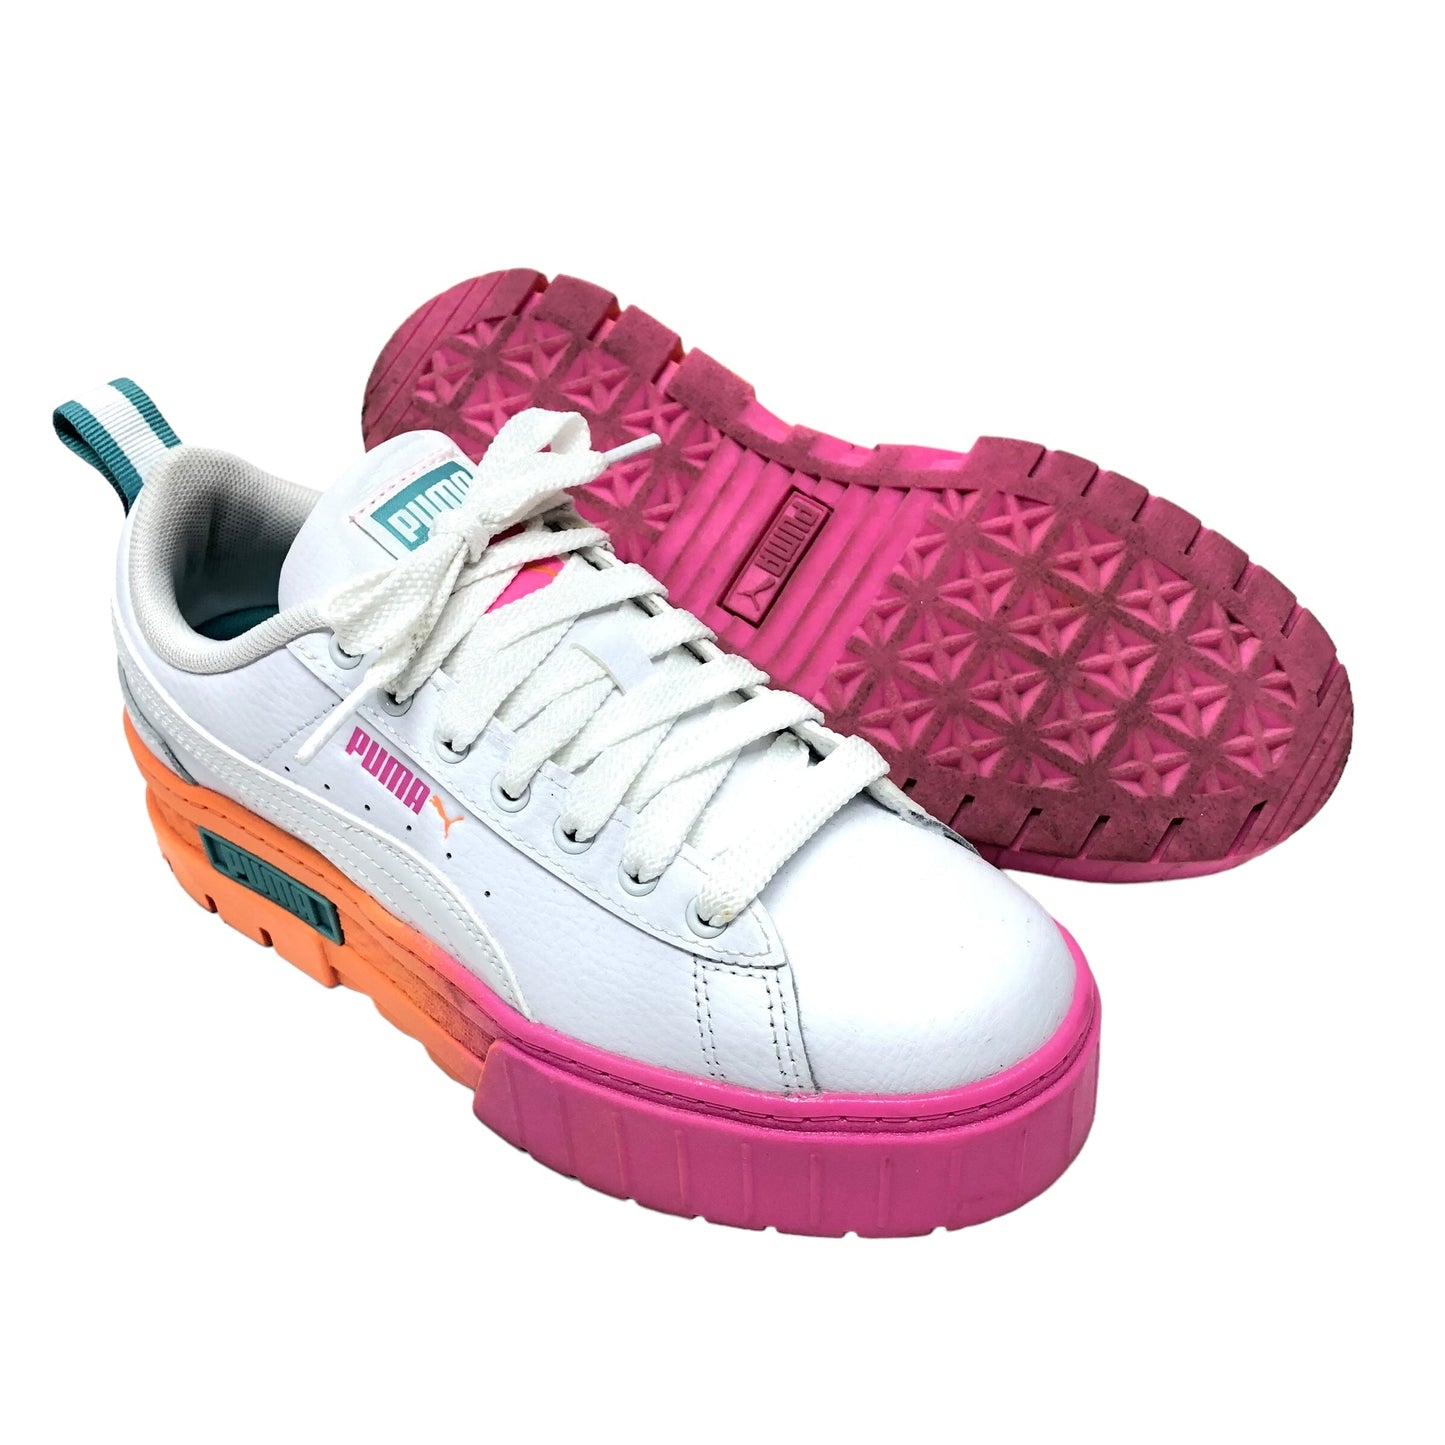 Orange & Pink Shoes Sneakers Puma, Size 5